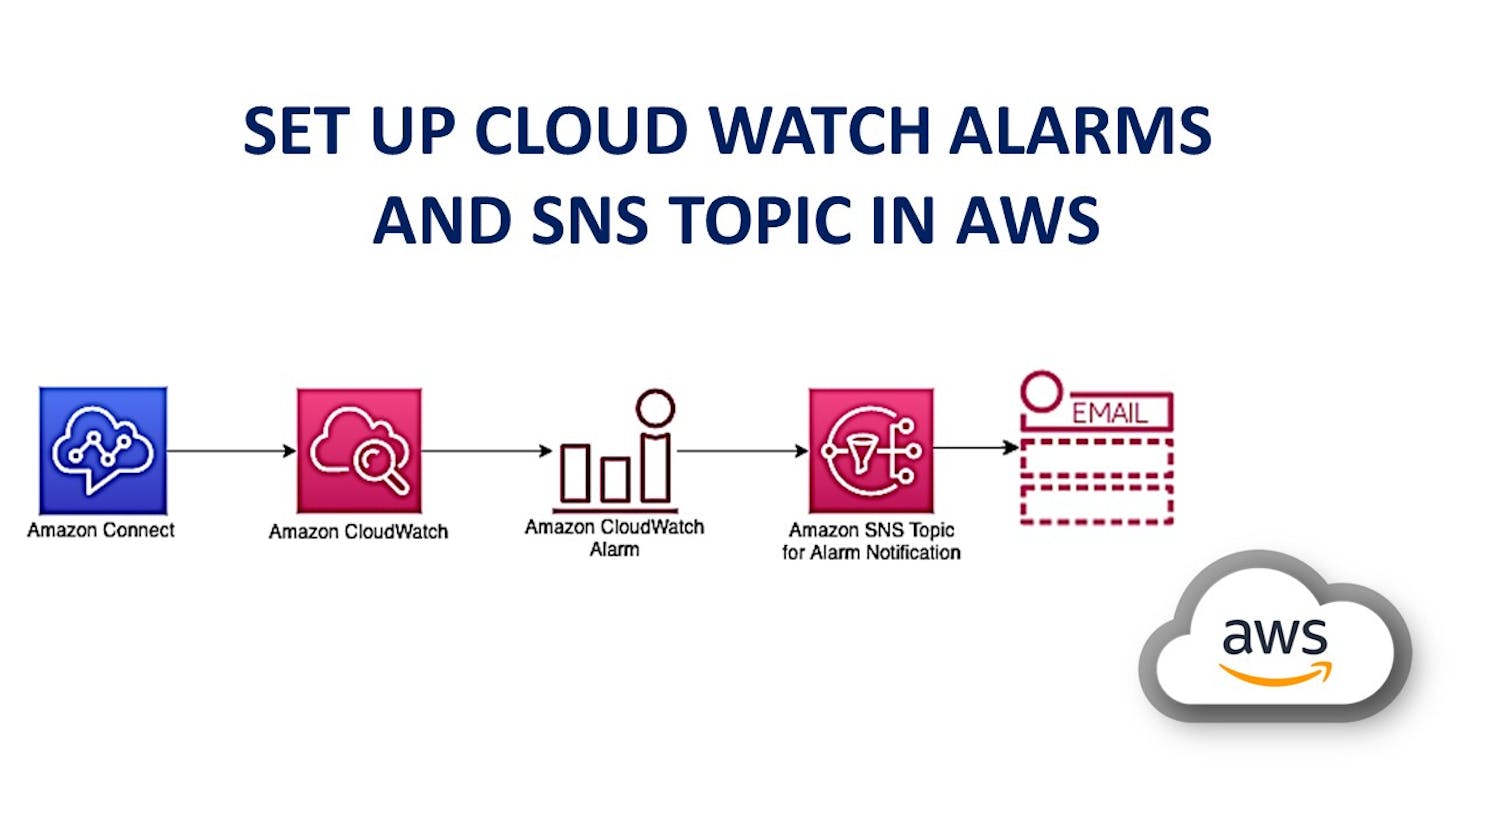 Set up CloudWatch alarms and SNS topics in AWS